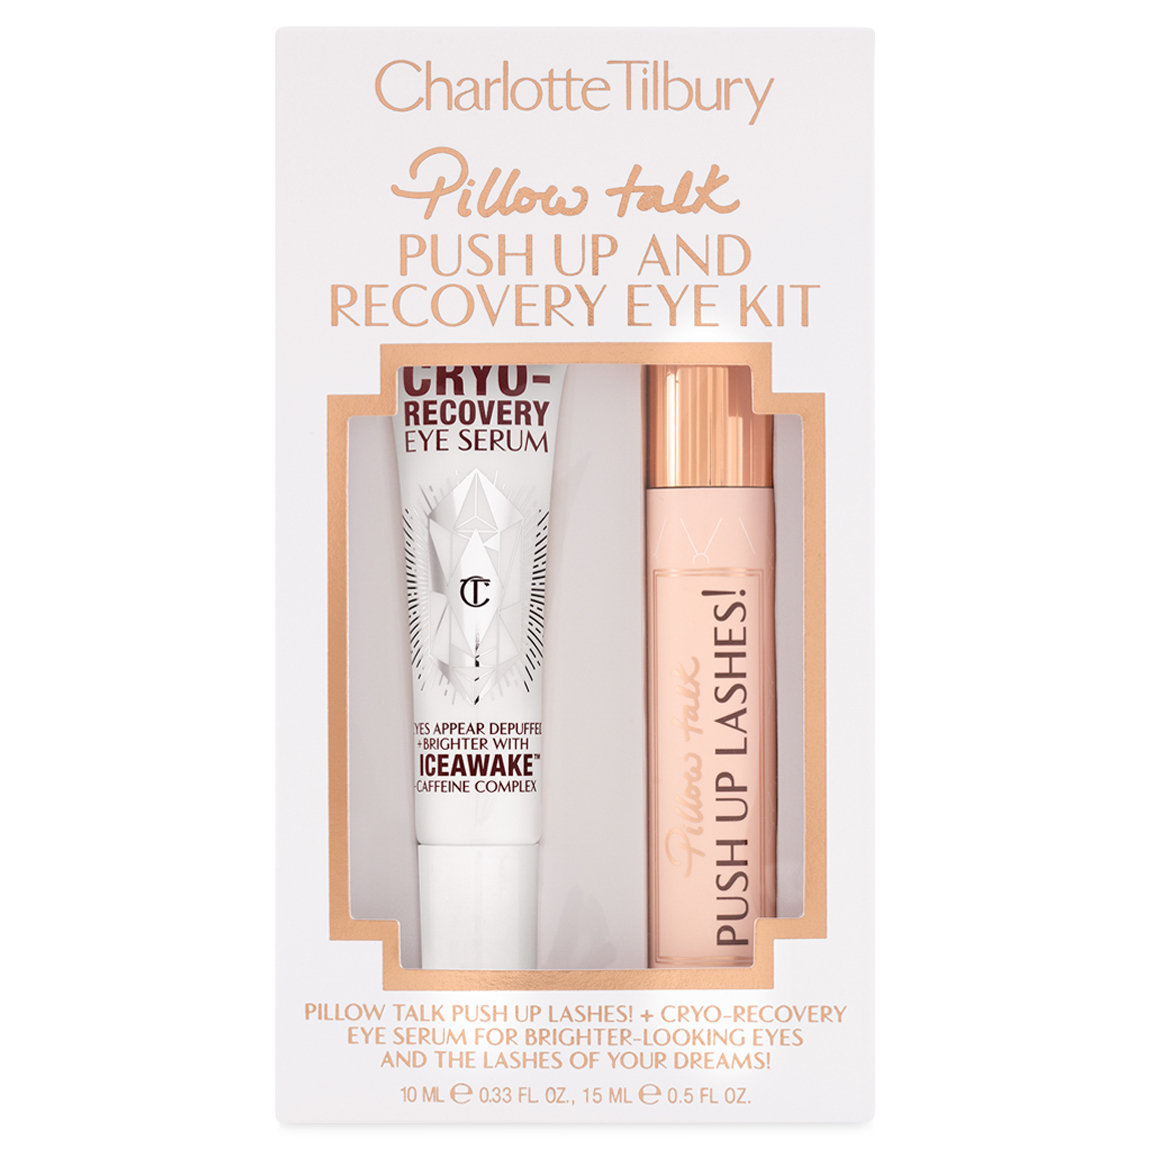 Charlotte Tilbury Pillow Talk Push Up & Recover Eye Set alternative view 1 - product swatch.